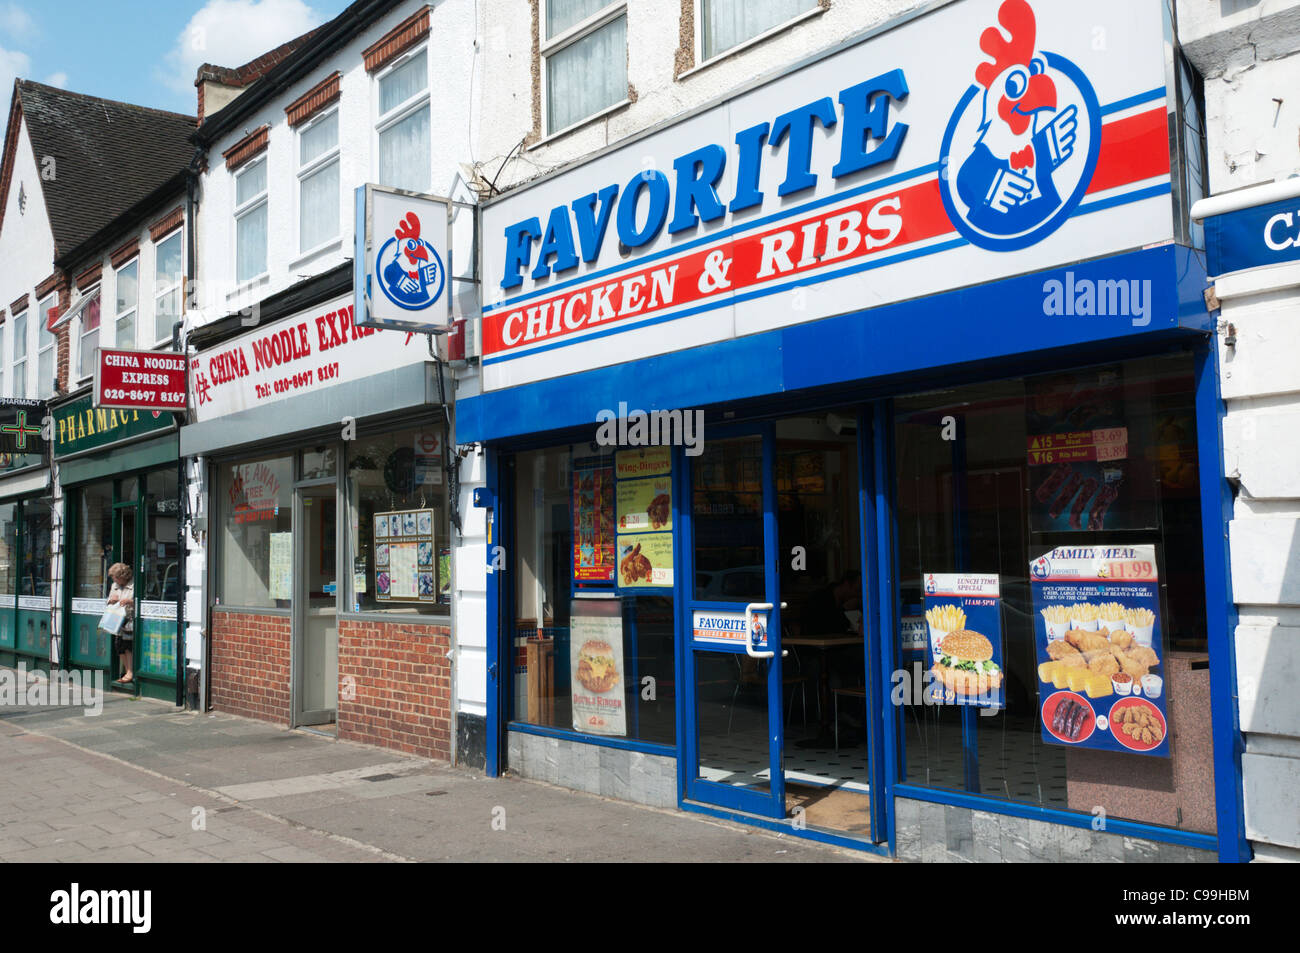 A branch of Favorite Chicken & Ribs in South London Stock Photo